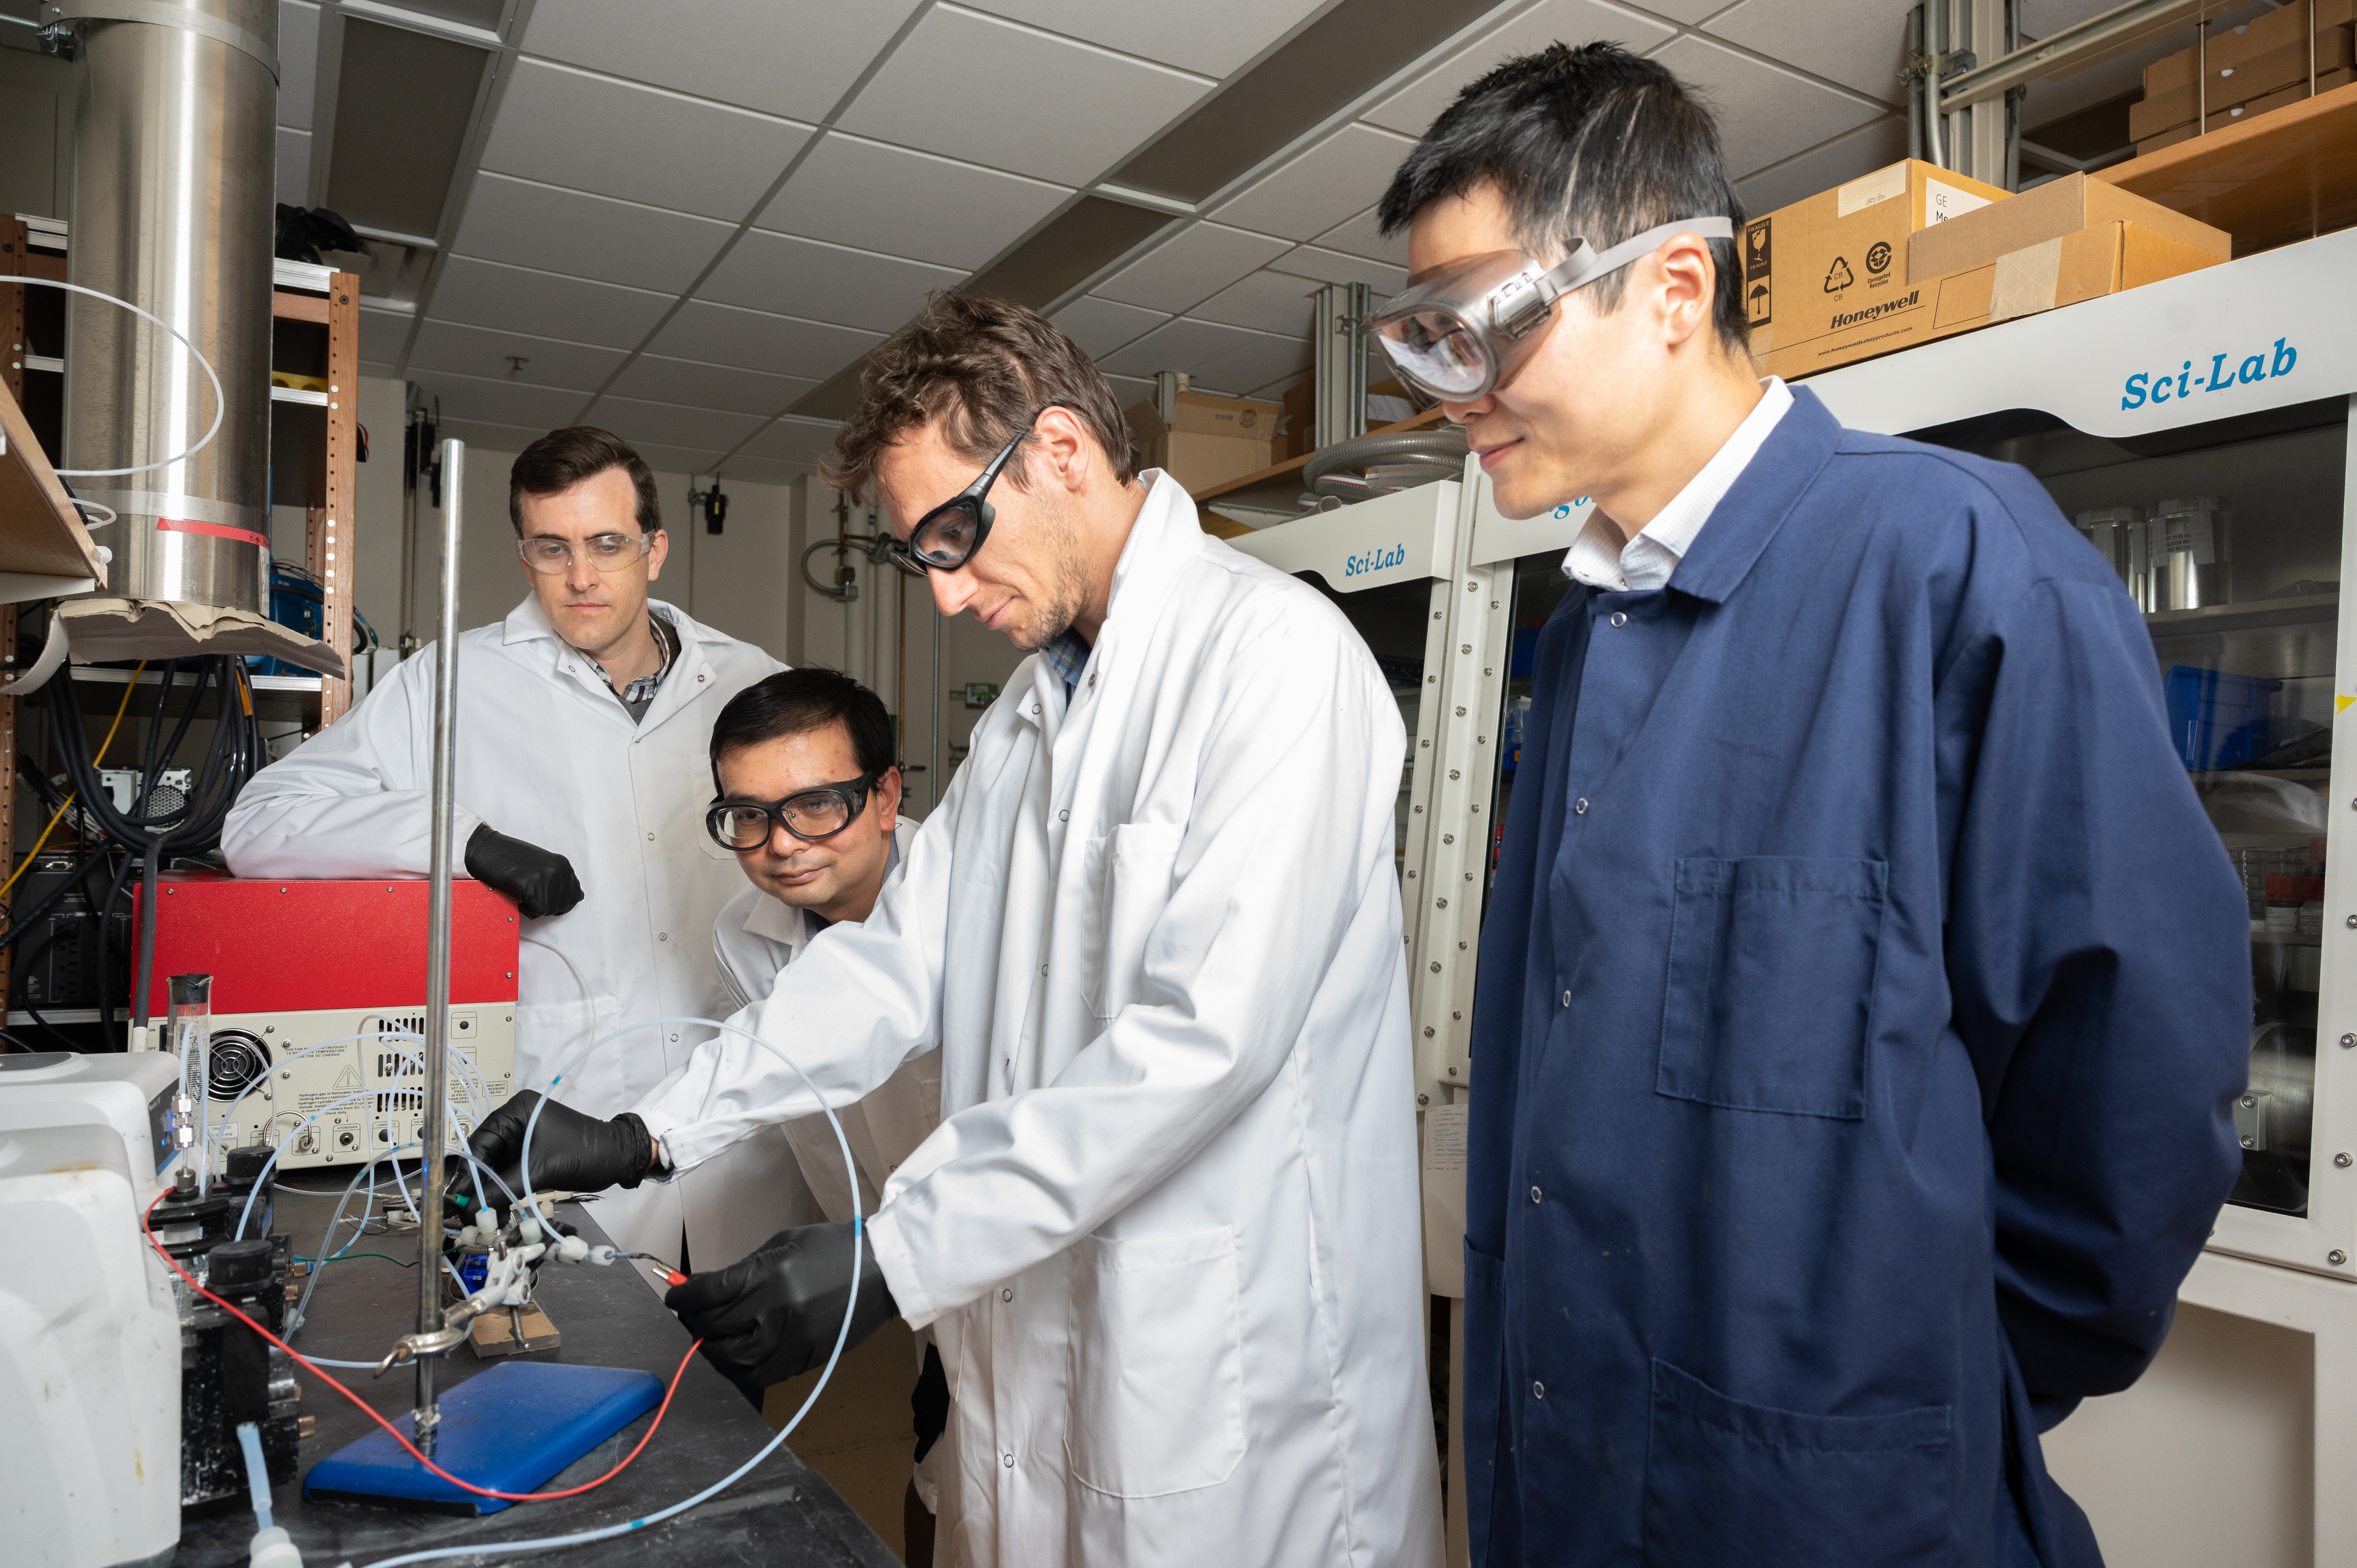 Researchers working in the lab at Georgia Tech